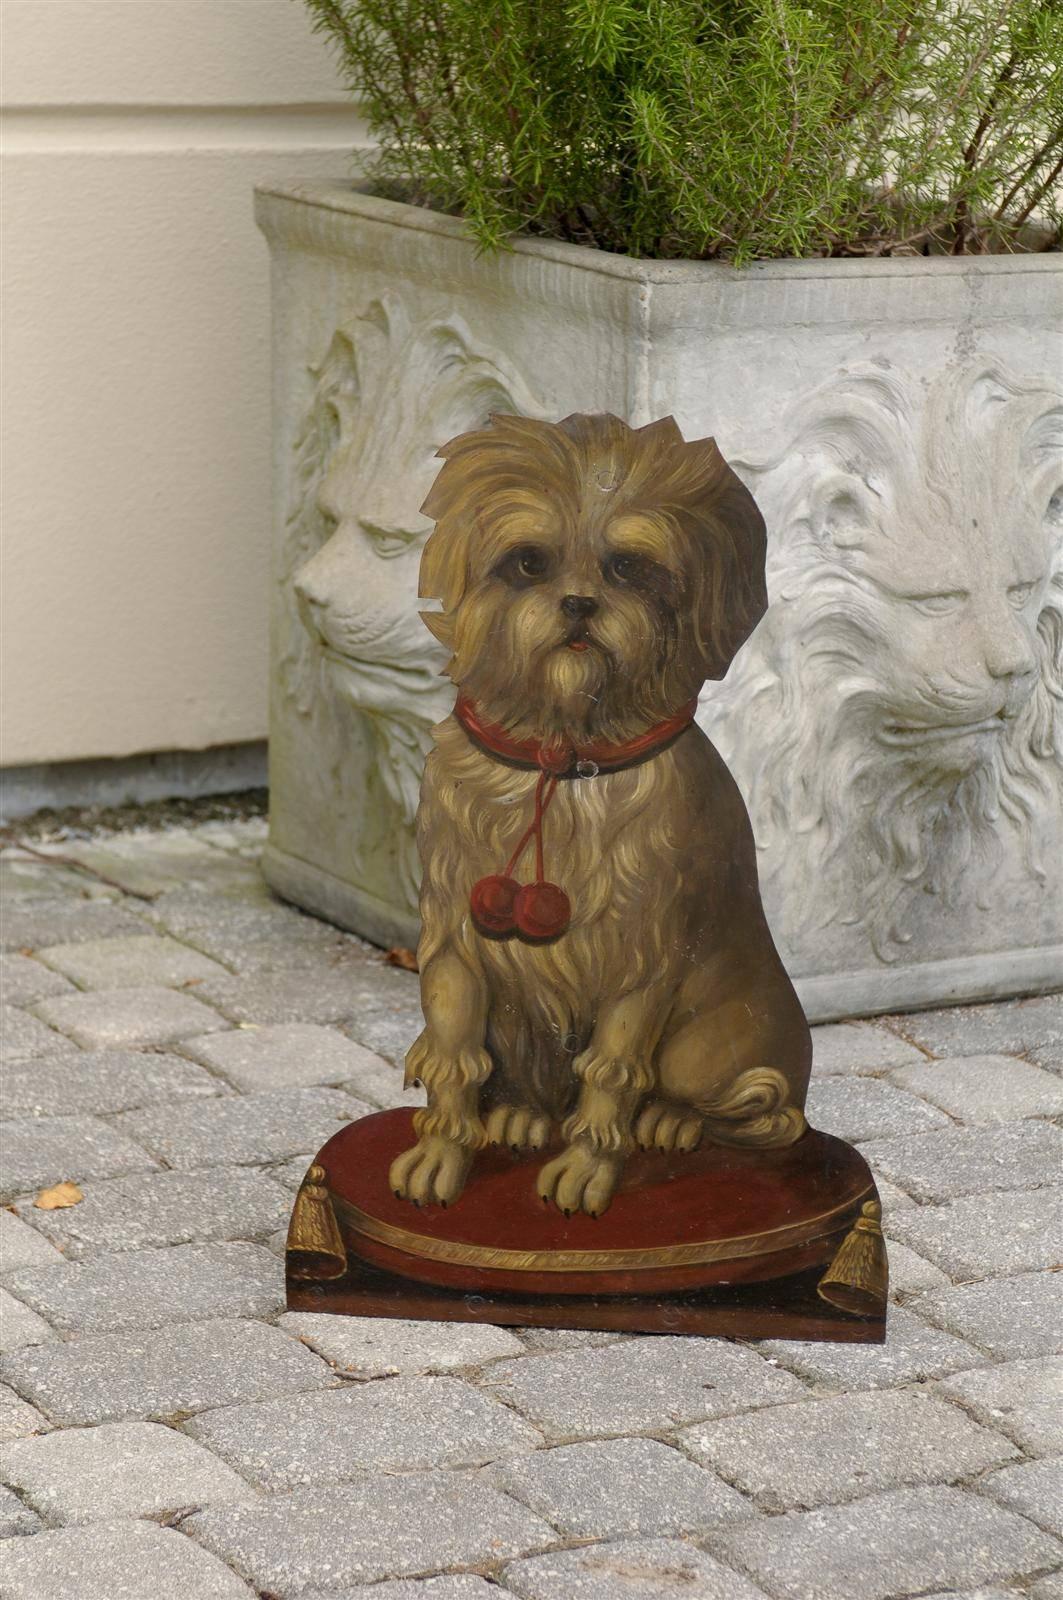 An English tole umbrella stand featuring a wonderfully painted terrier. This painted tole umbrella stand displays on its face a pleasant trompe l’œil style terrier, a traditionally popular dog in England. The dog is painted with numerous details